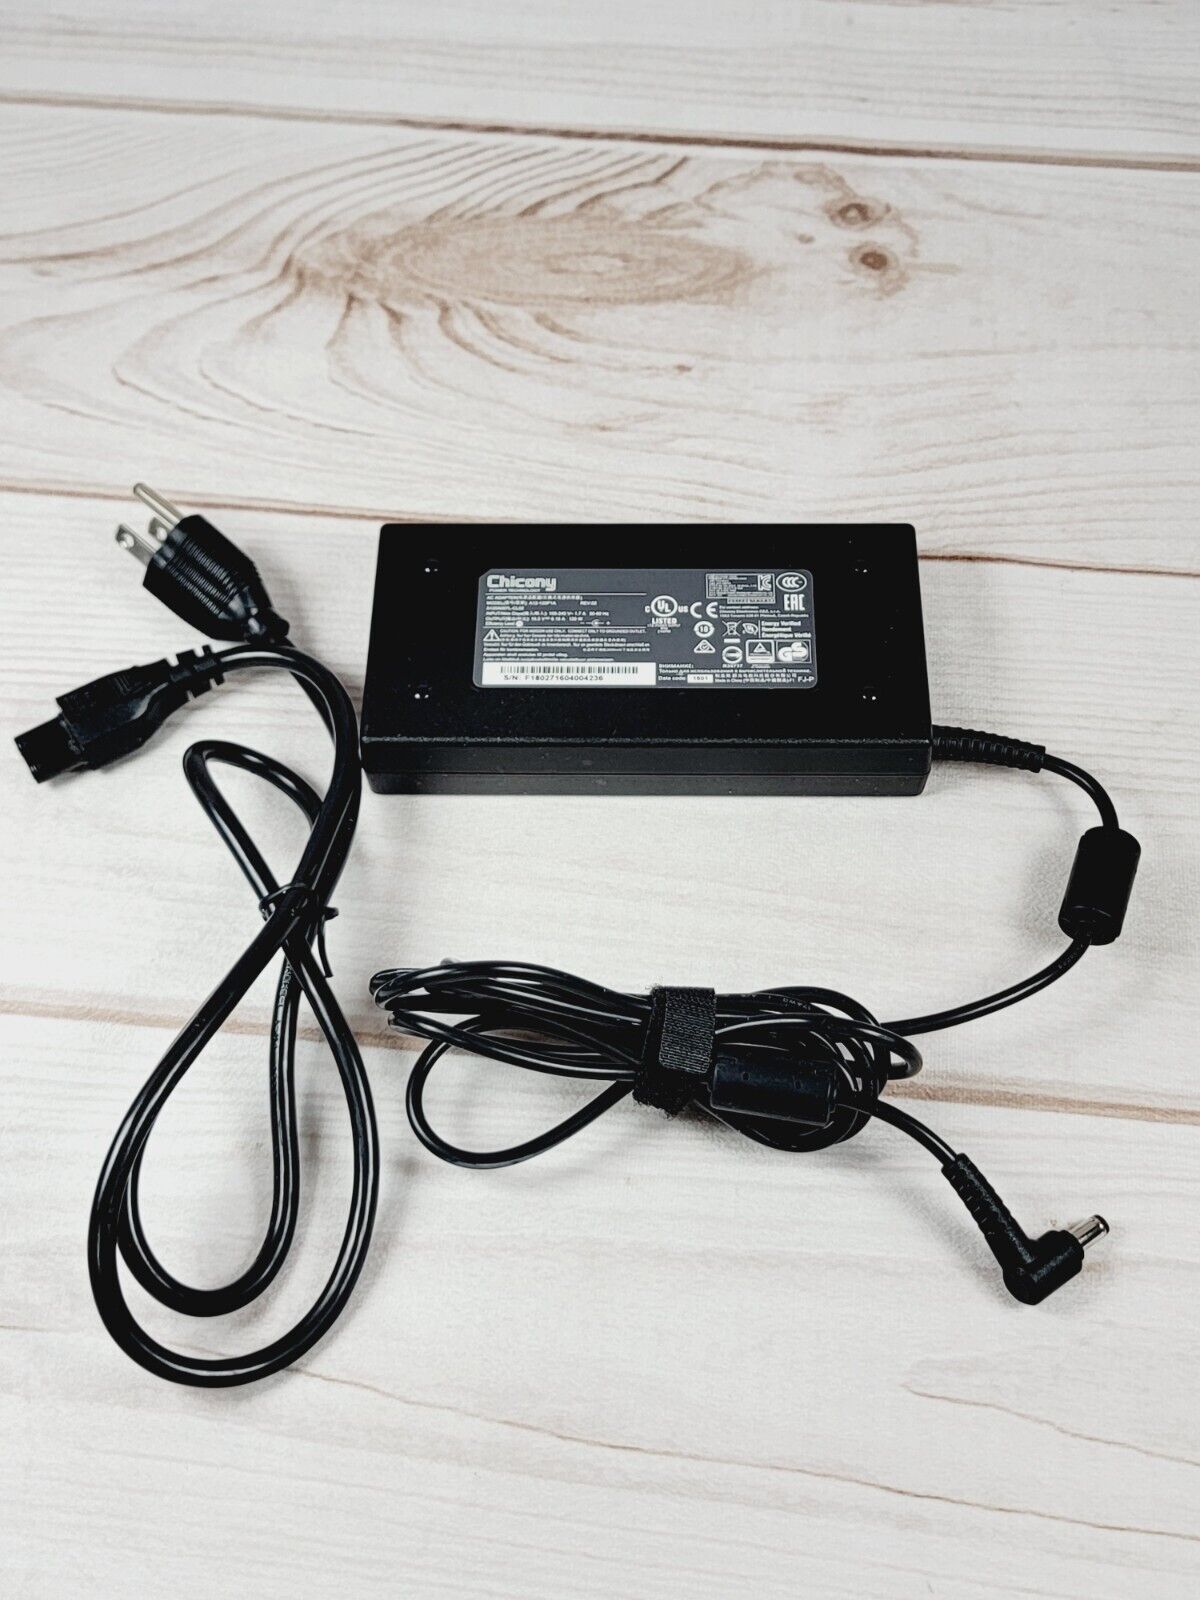 Chicony A12-120P1A Laptop Charger AC Adapter Power Supply 19.5V 120W Genuine OEM